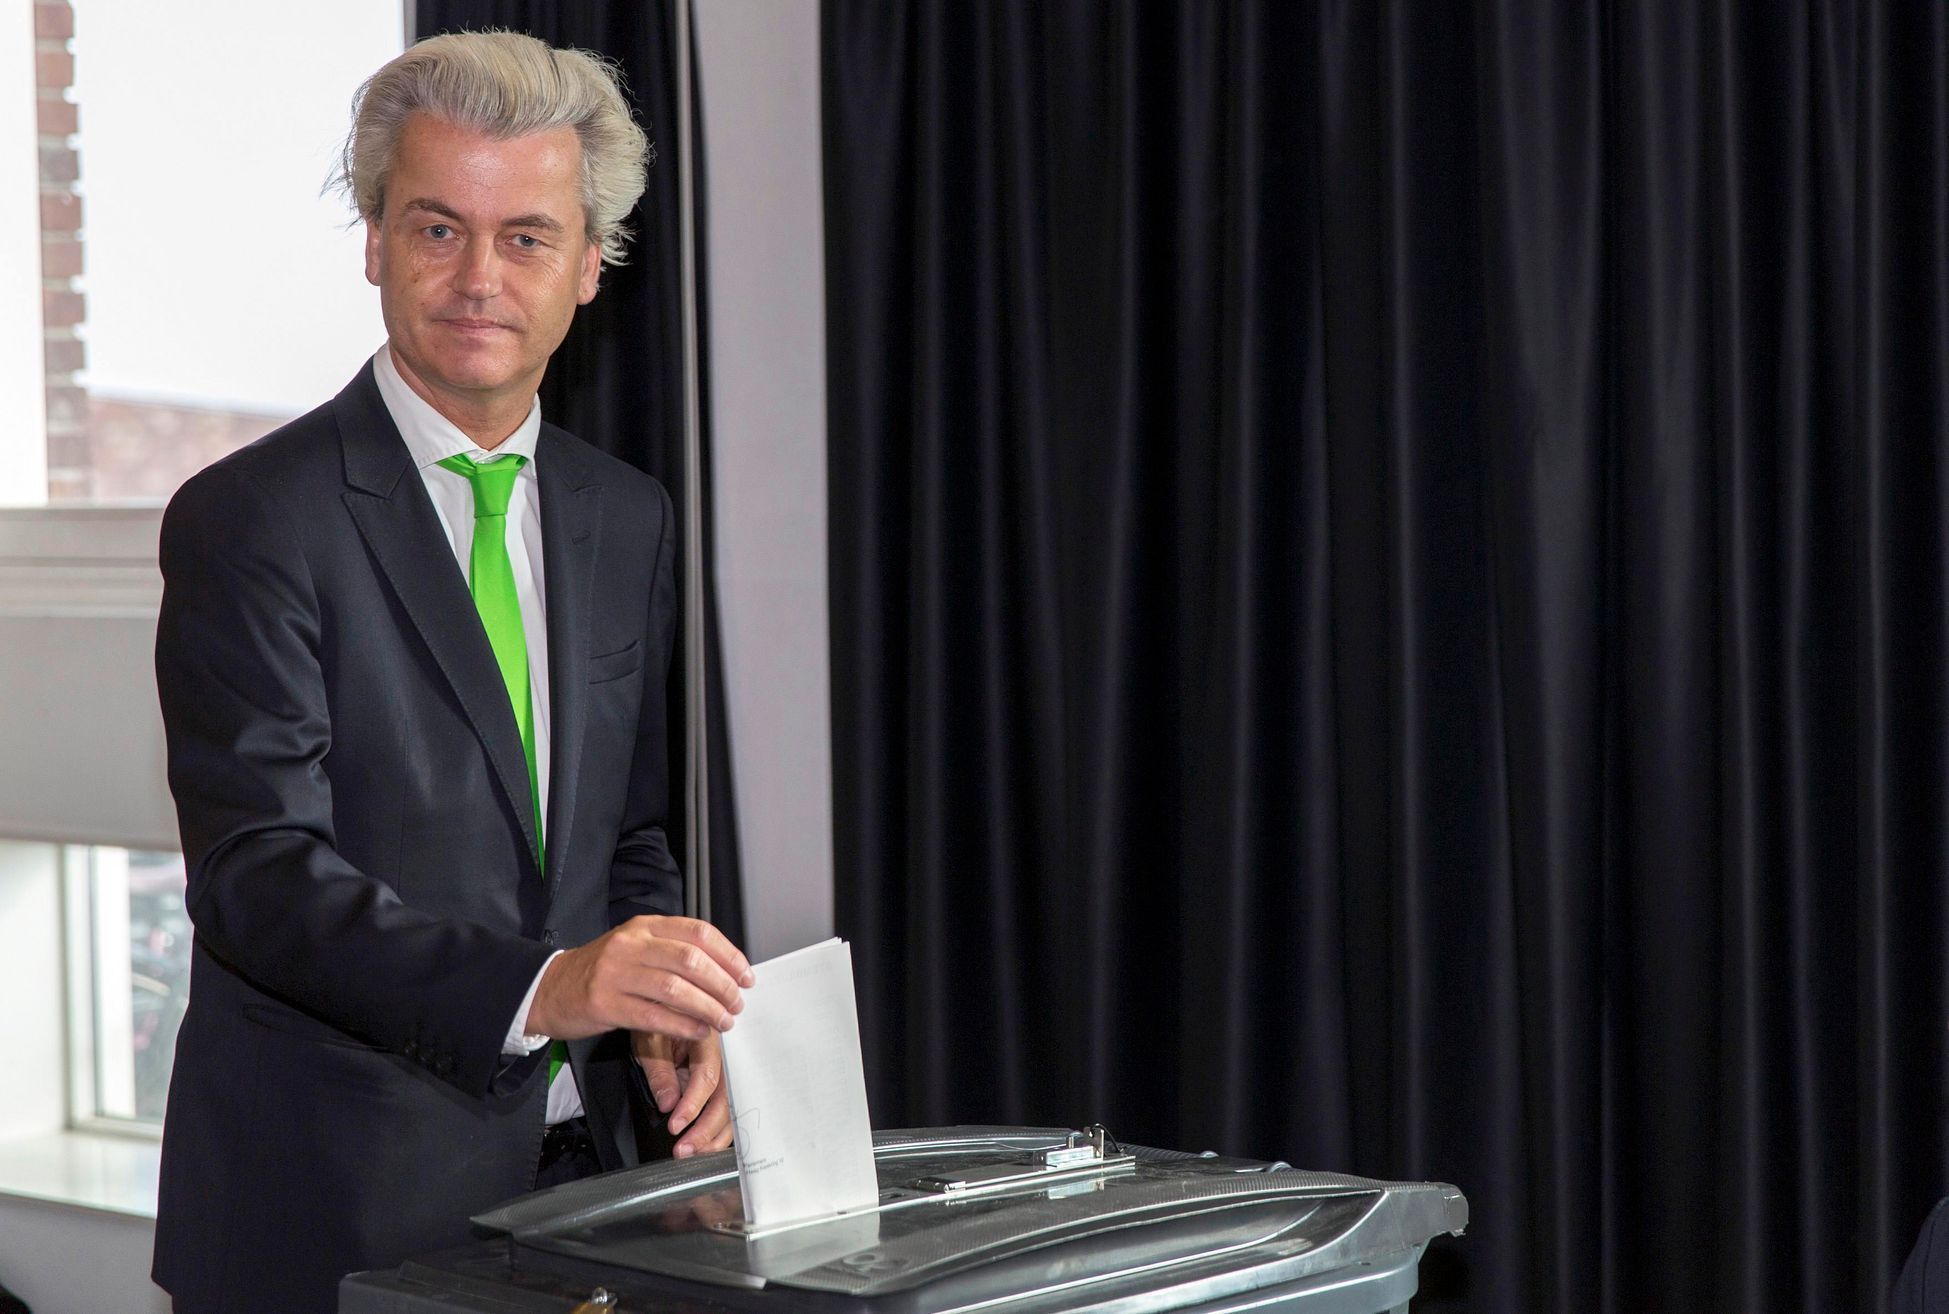 Geert Wilders of the anti-immigration Dutch Freedom Party casts his vote during the European Parliament elections, in an elementary school in the Hague